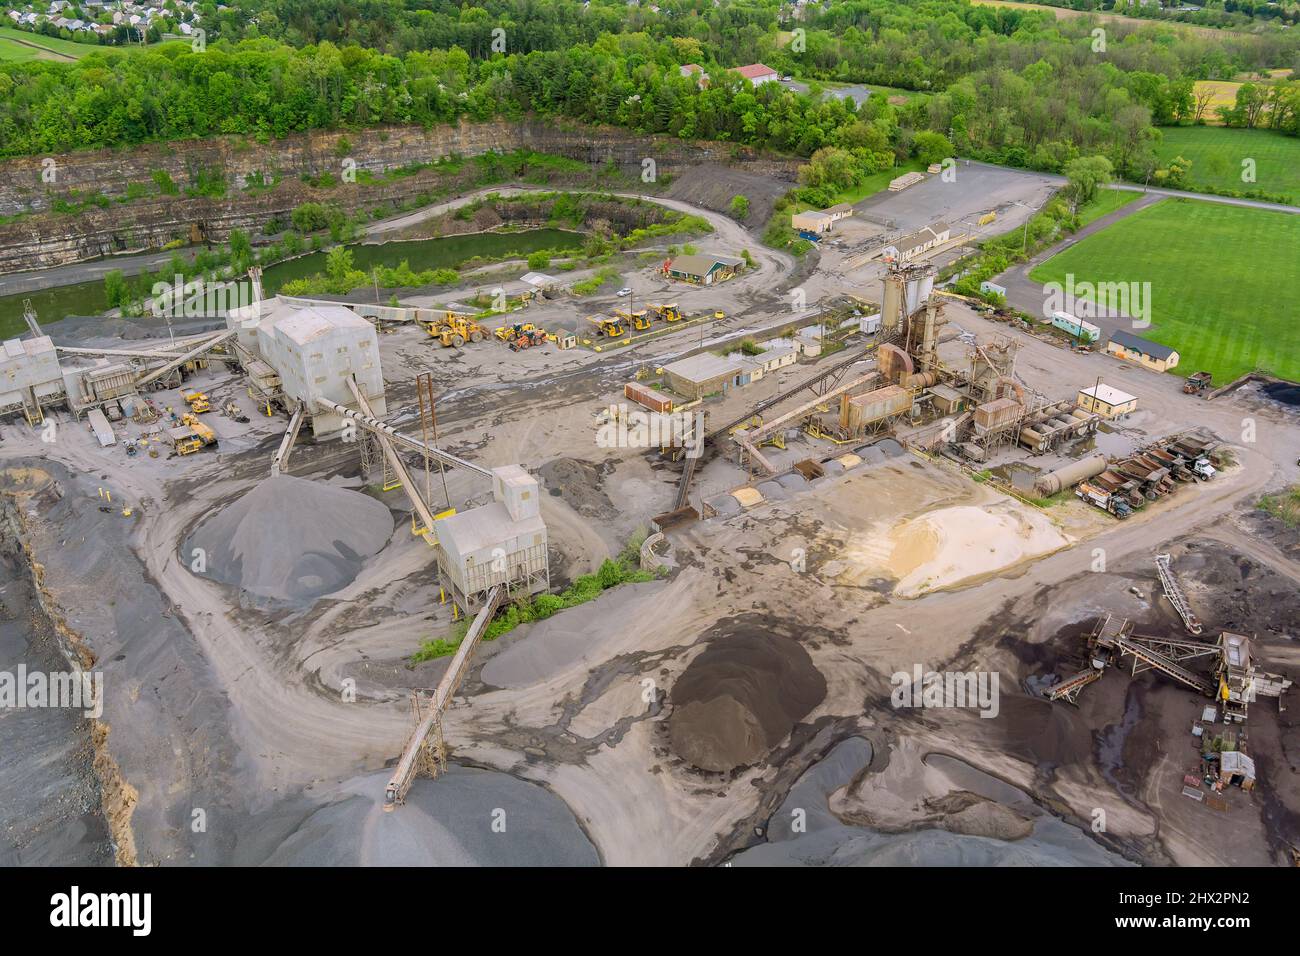 Mobile Stone crusher machine by the construction site or mining quarry for  crushing old concrete slabs into gravel and subsequent cement production  Stock Photo - Alamy